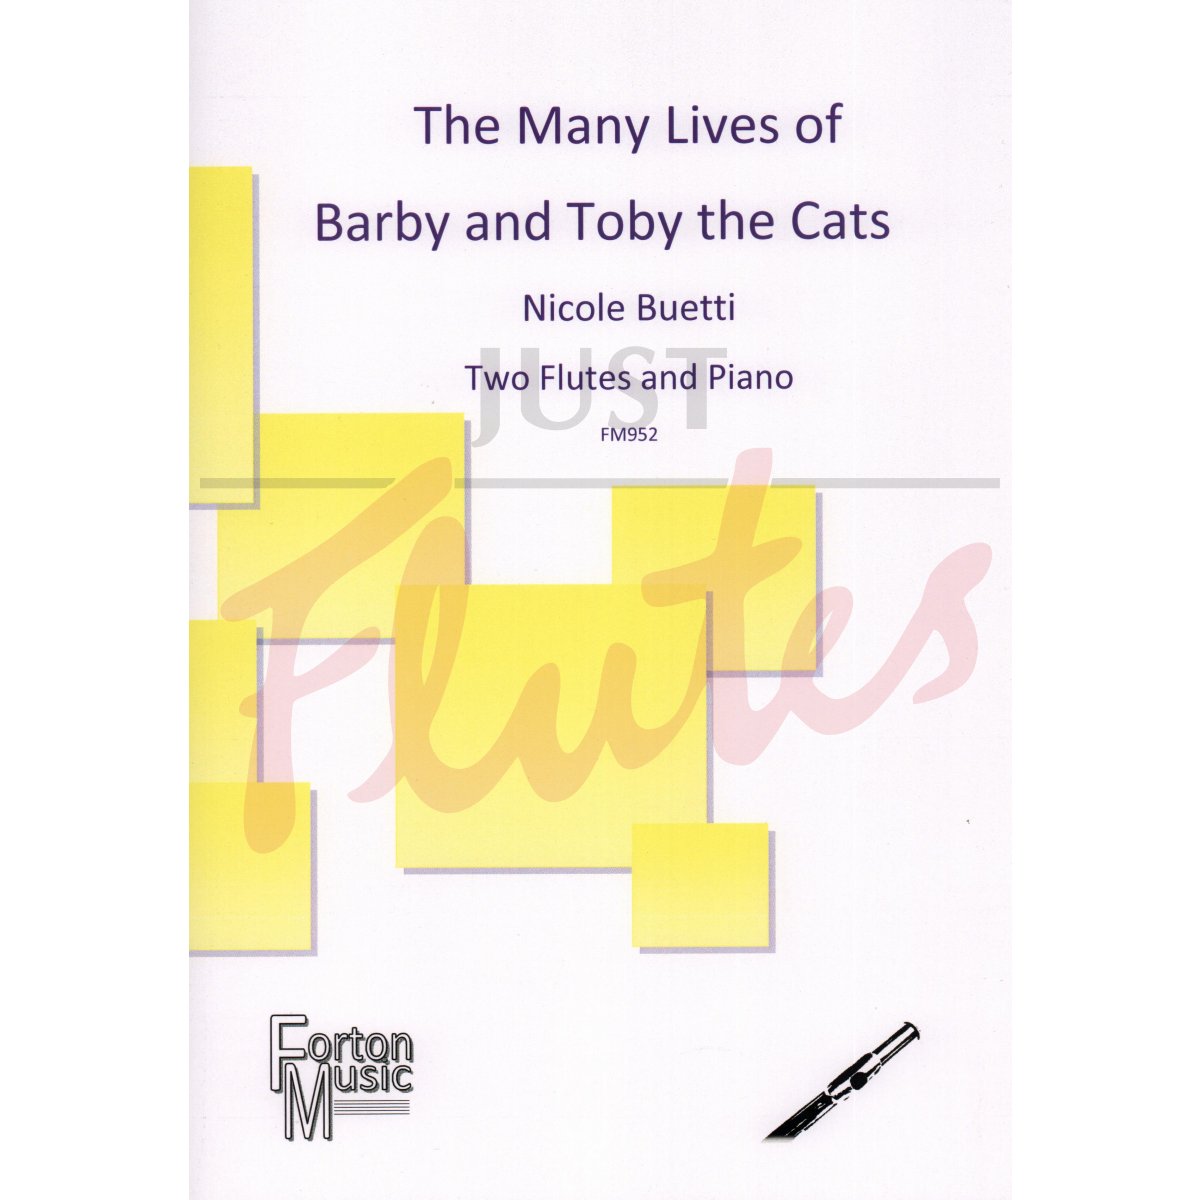 The Many Lives of Barby and Toby the Cats [2 Flutes and Piano]